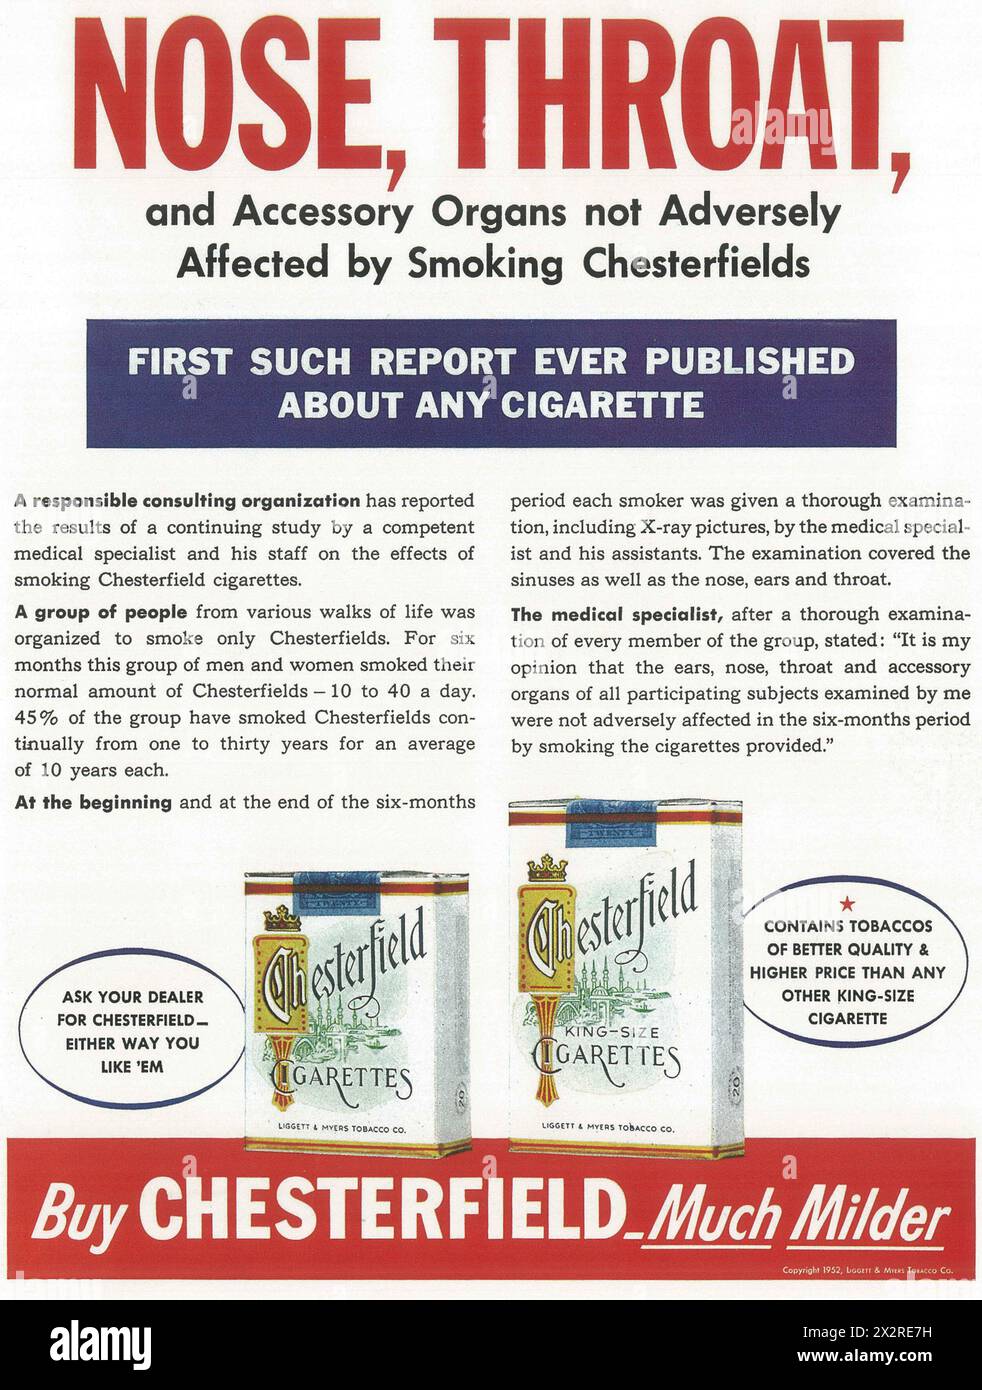 1952 Chesterfield cigarettes ad - 'Nose, throat...are not affected by smoking cigarettes...Medical specialist stated ' Stock Photo